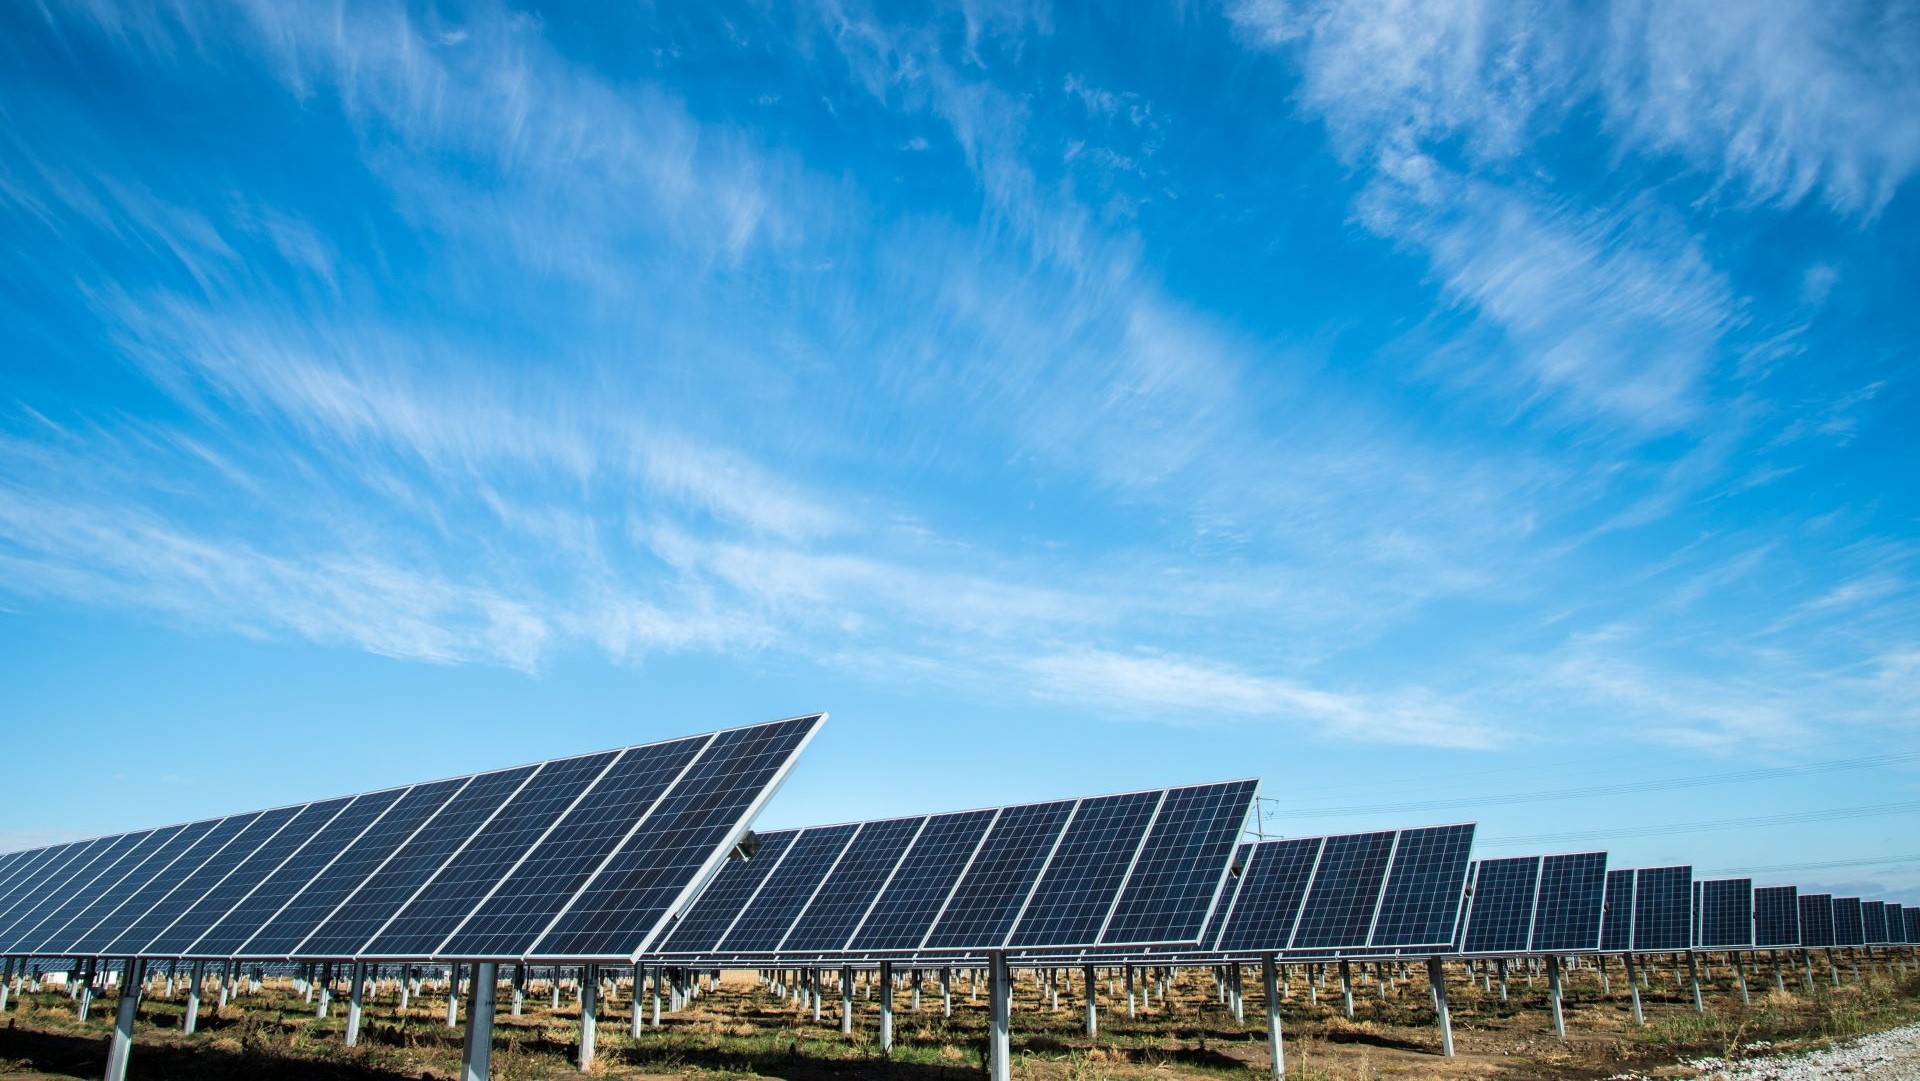 Rows of solar panels on grassy ground set against bright blue sky